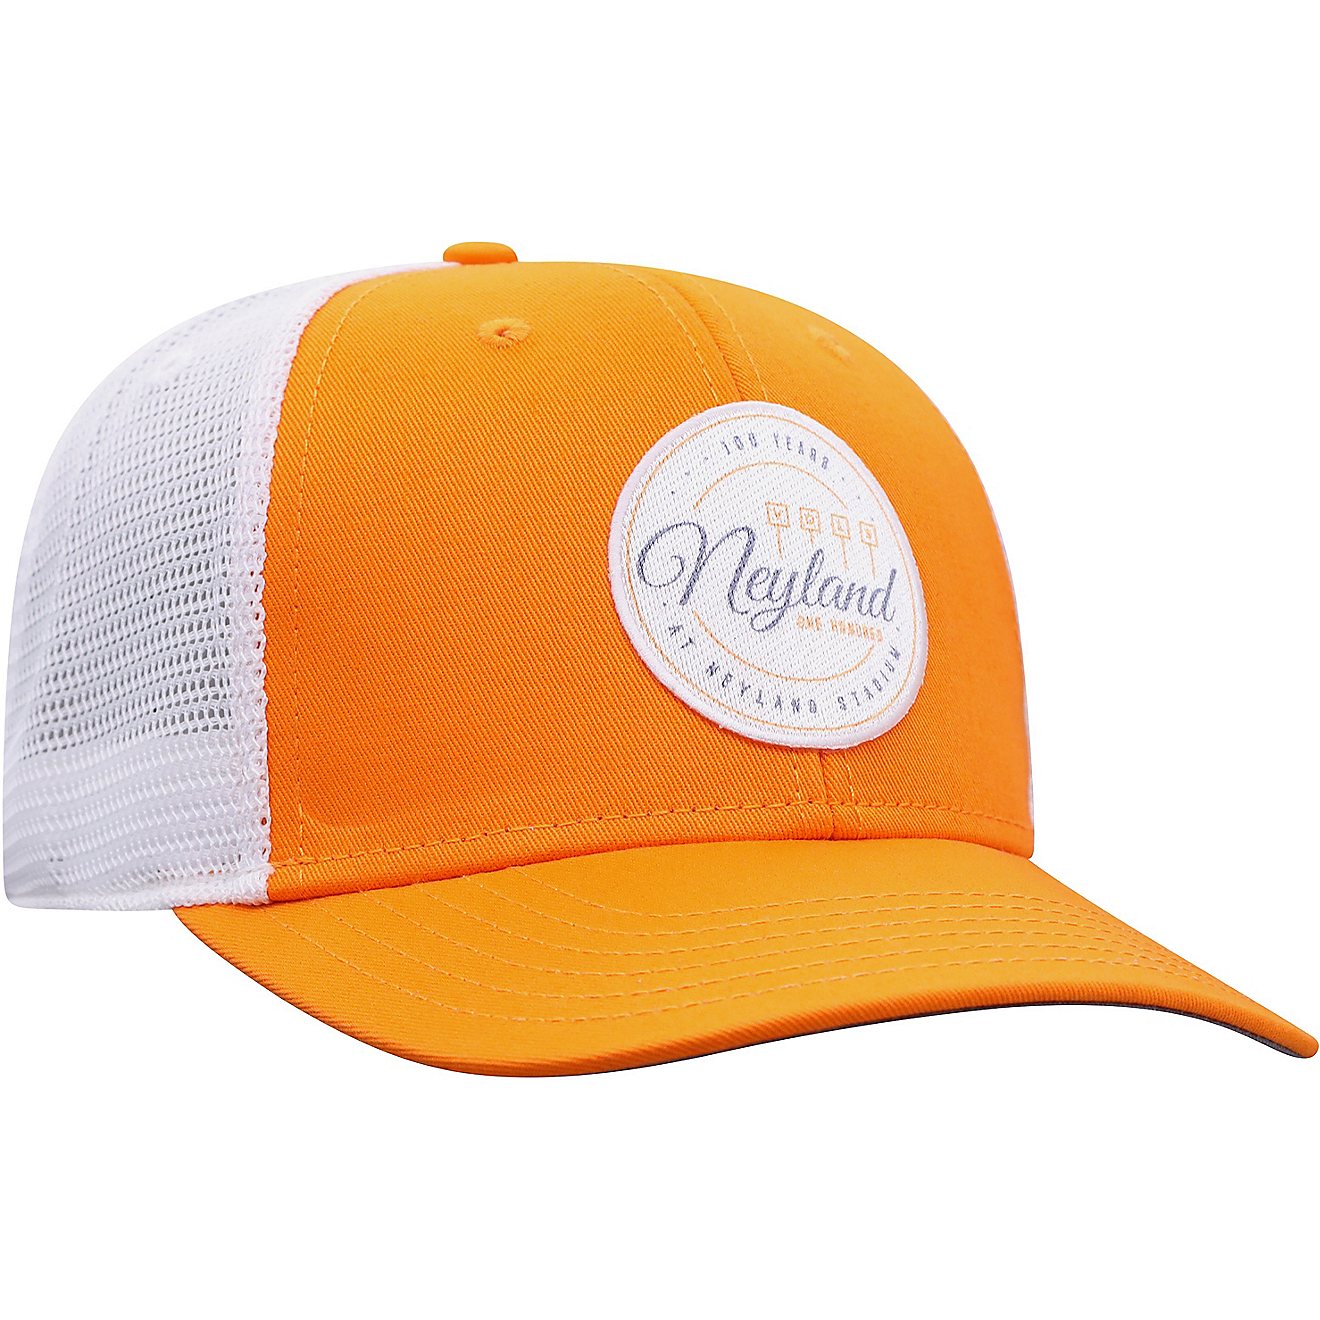 Top of the World Men's University of Tennessee Neyland 100 Circle Stadium Cap                                                    - view number 4